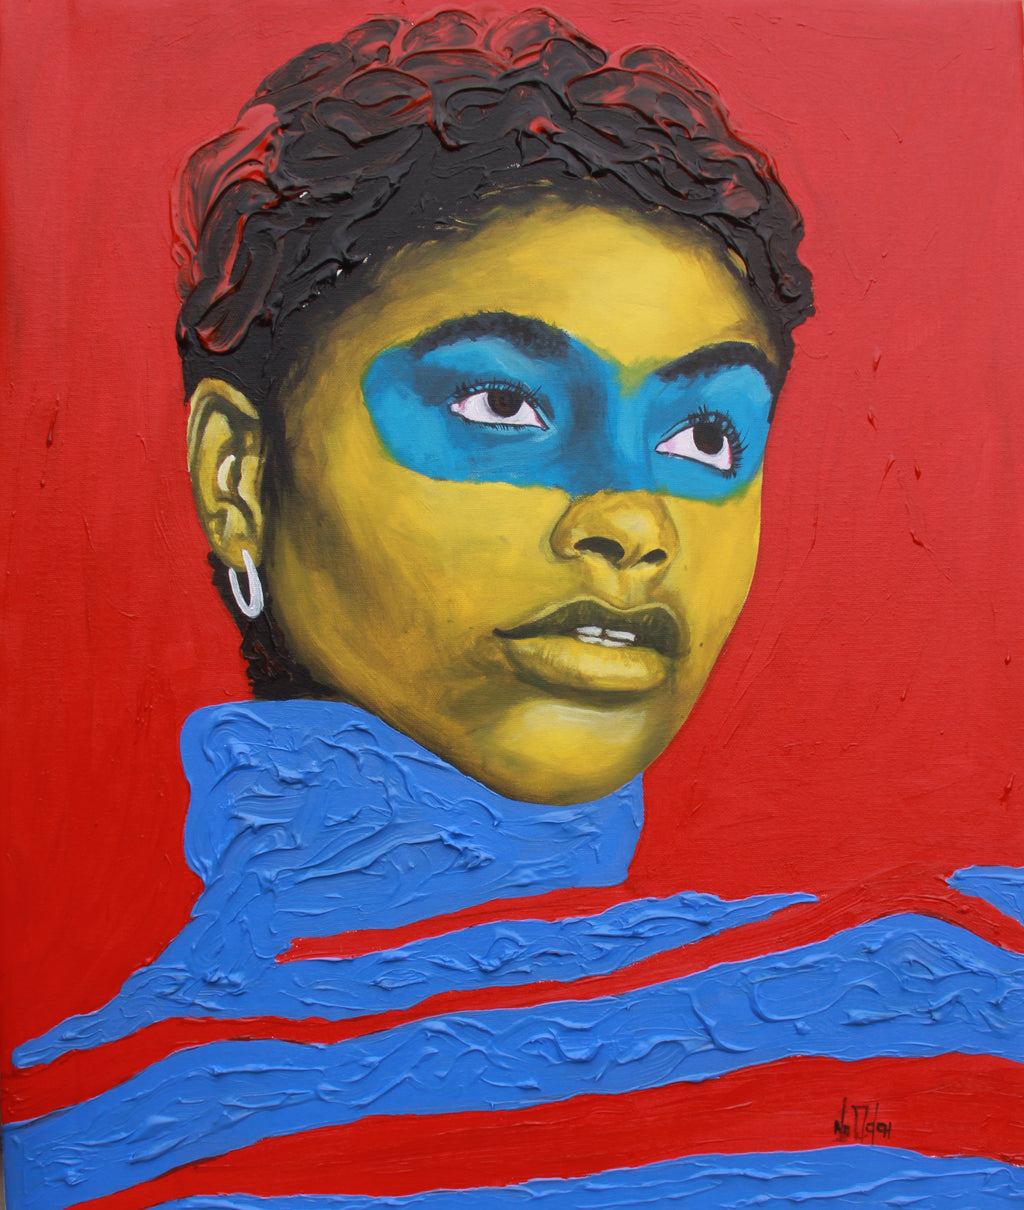 Acrylic paintin of a black woman with red and blue textured turtleneck and red background